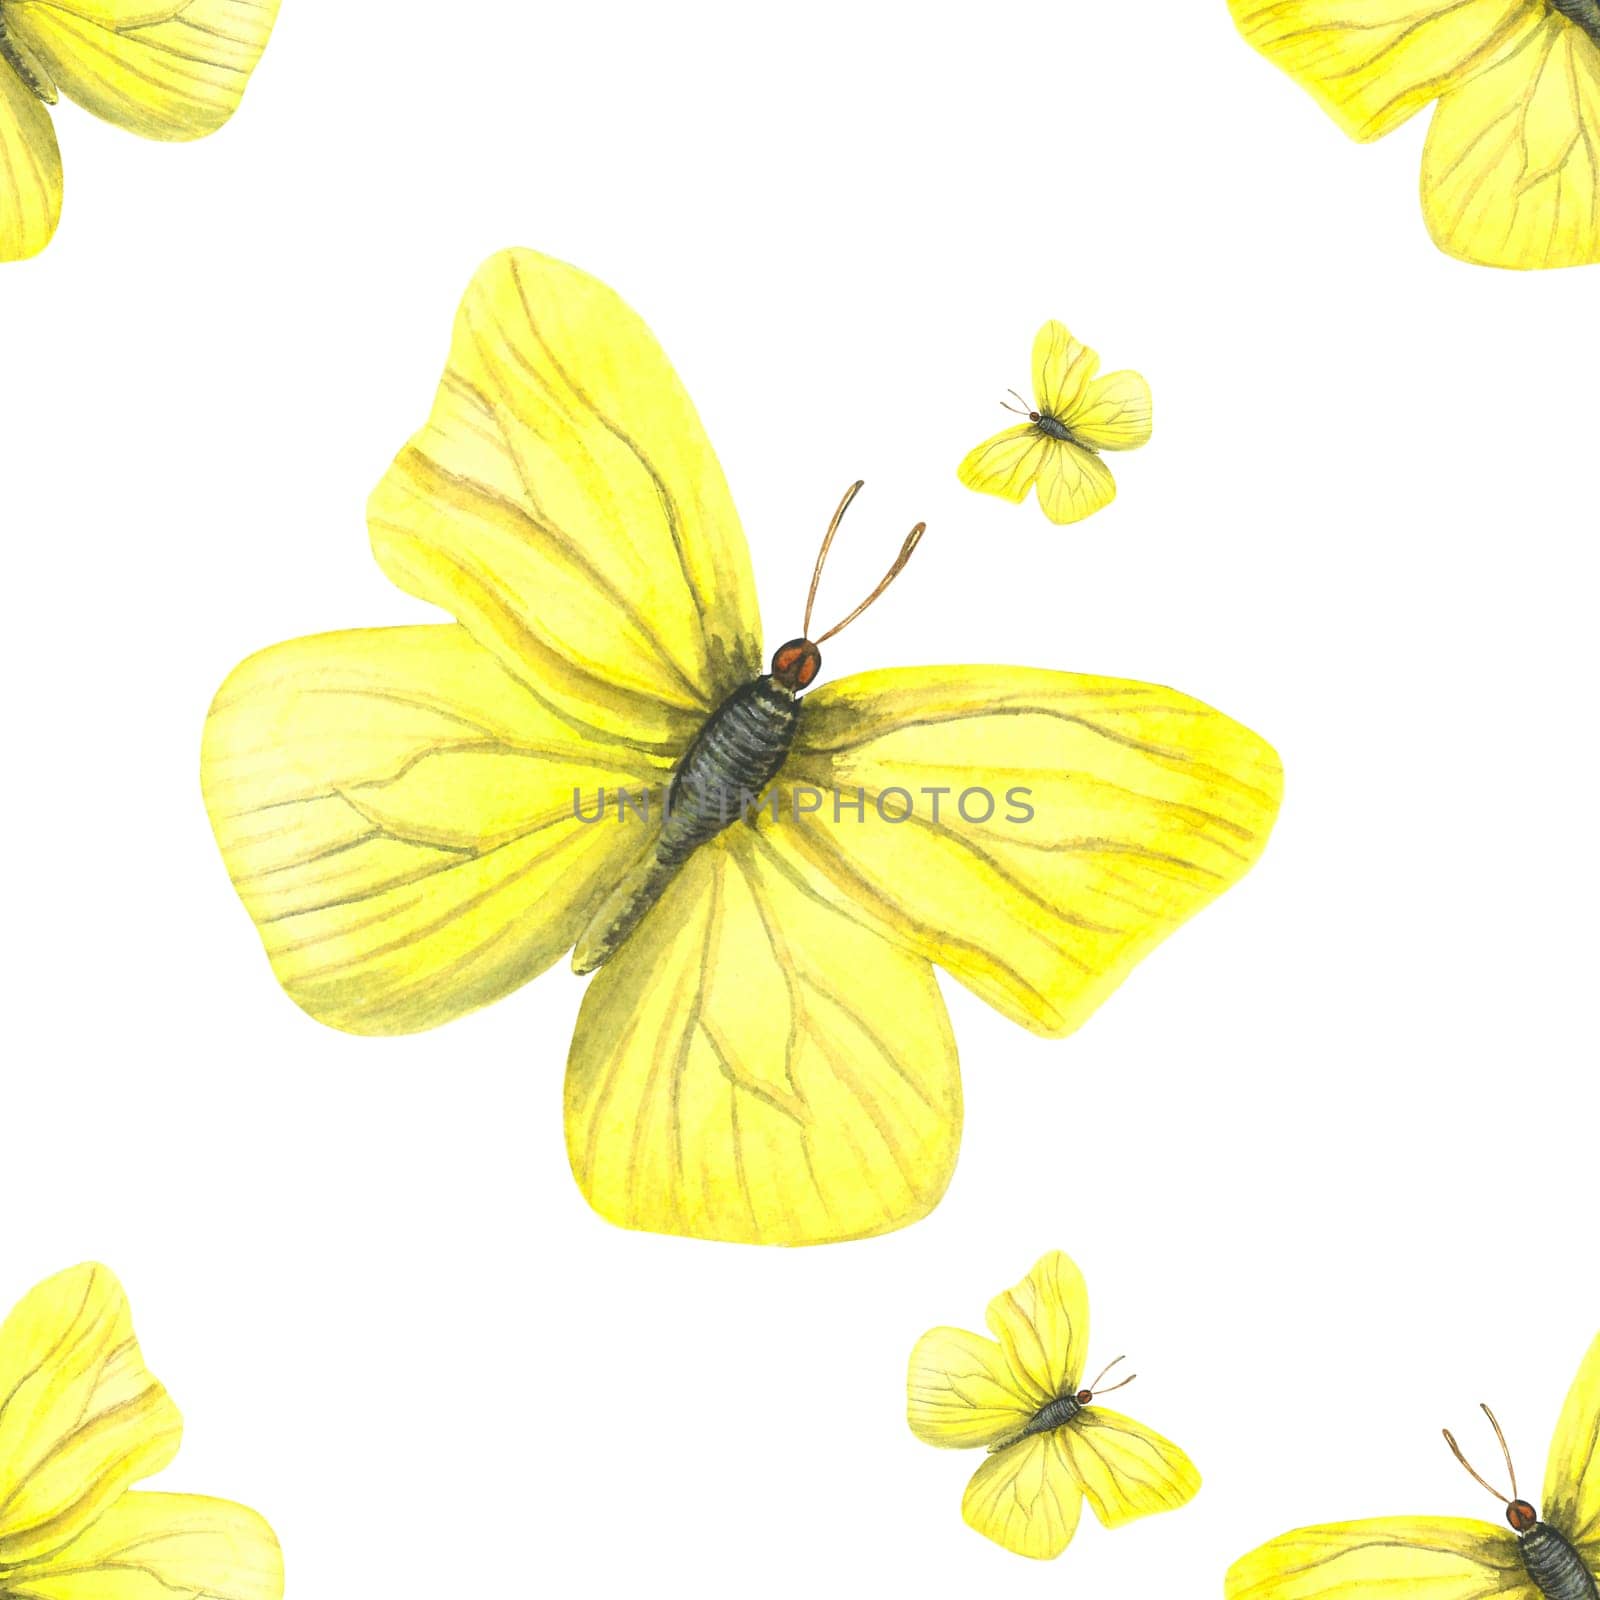 Seamless pattern of watercolor illustration of a male yellow butterfly Gonepteryx rhamni. Made by hand on a white background.